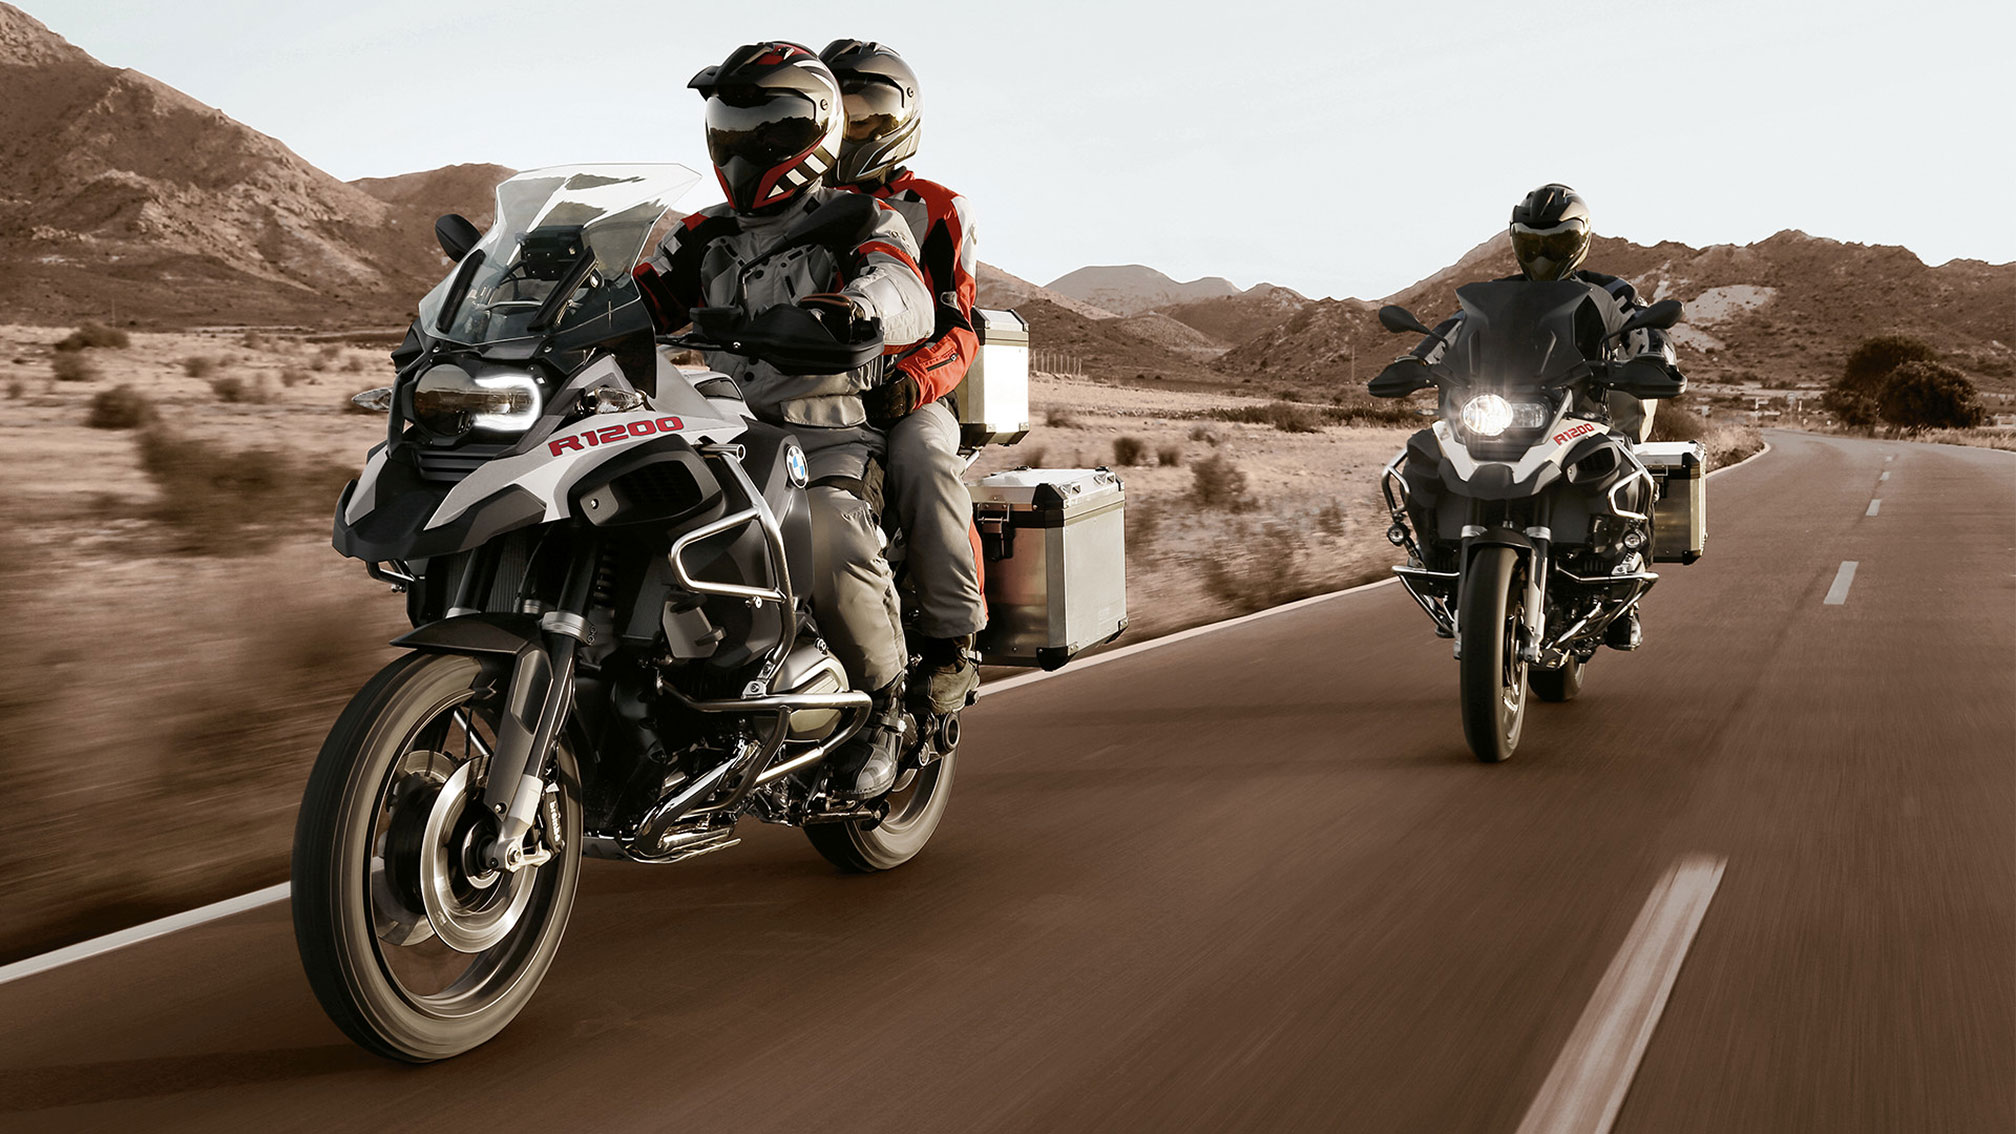 adv maroc; adv morocco; motorcycle rentals; adventure; bmw motorcycle rentals; travel agency; learn surf; tours; activities